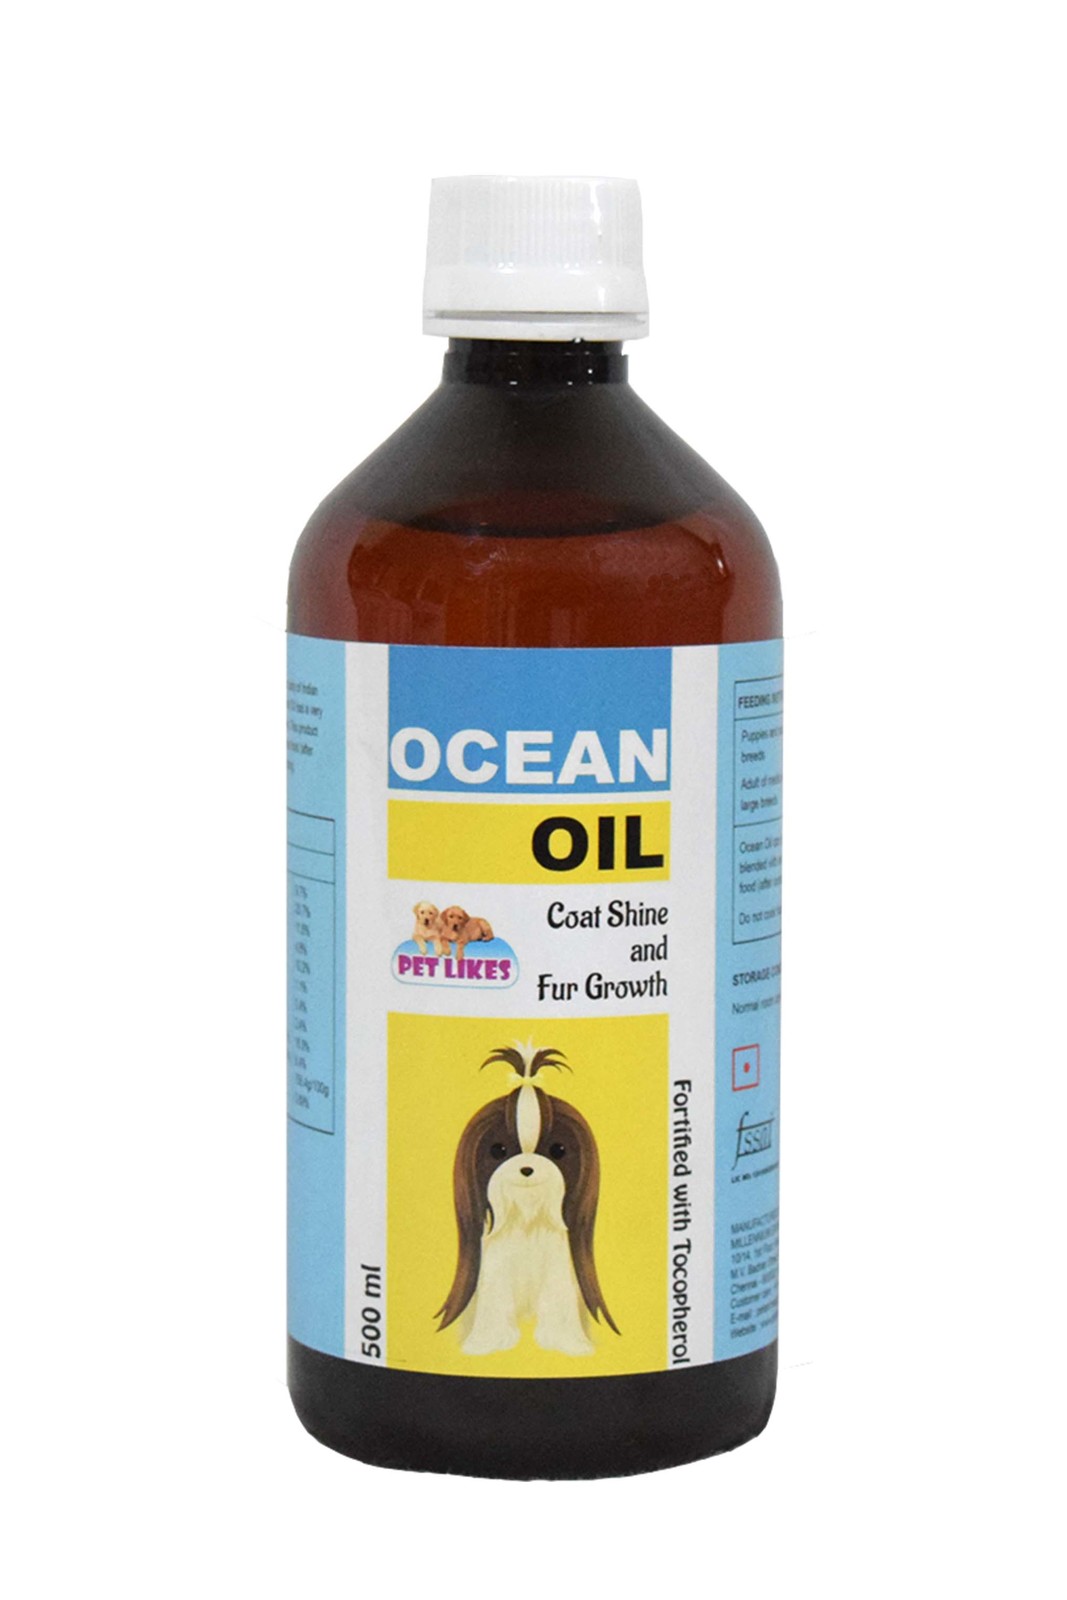 Ocean Oil – 500 ml. Fur Growth And Coat Shine For Dogs